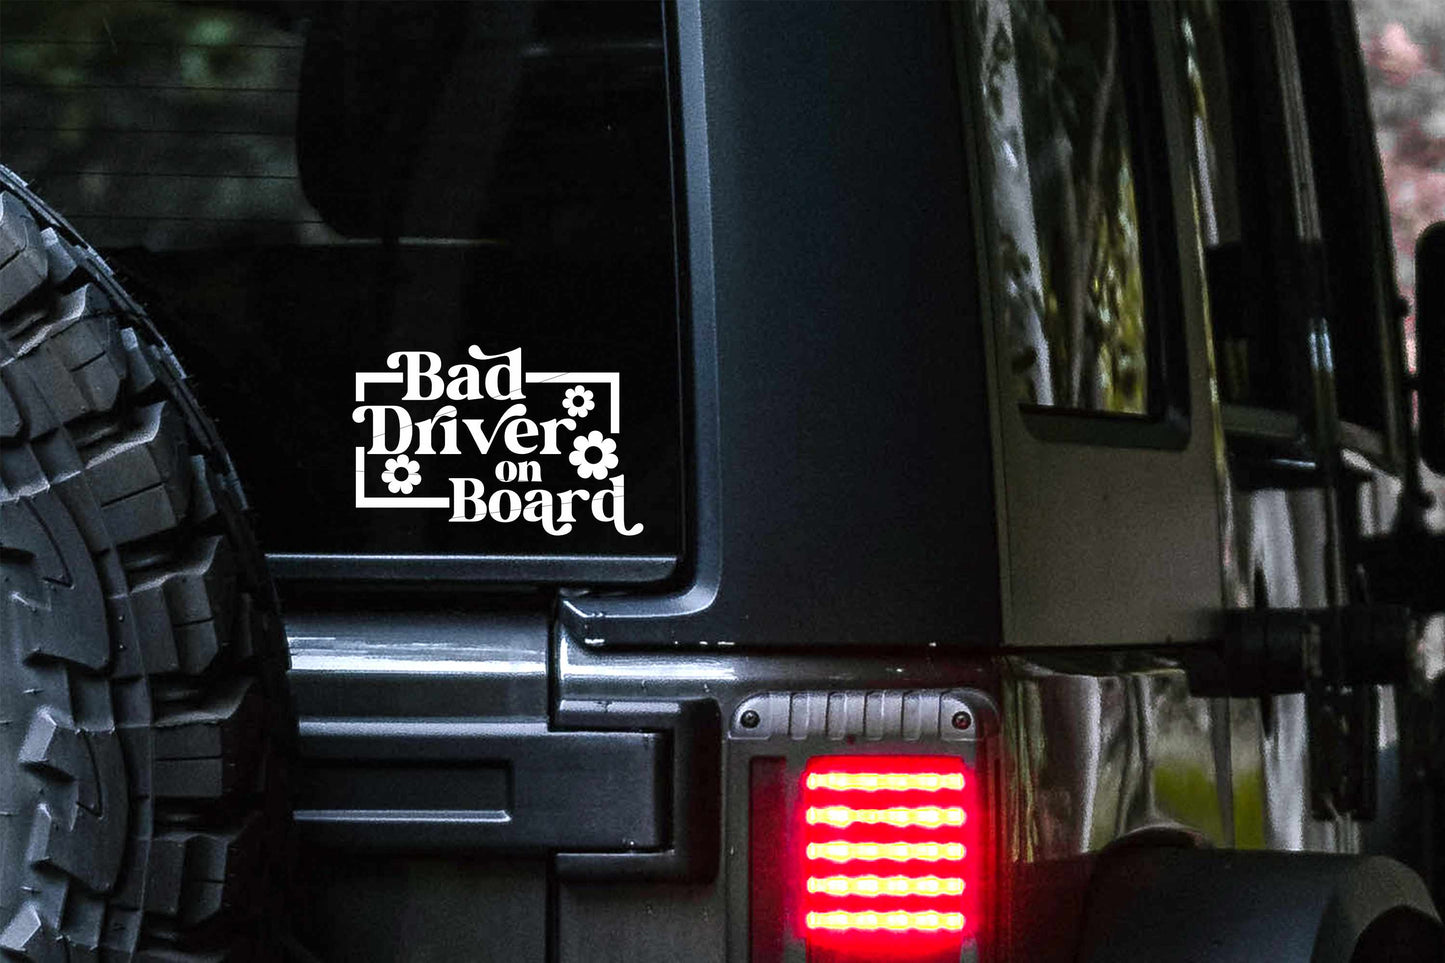 A retro flower design vinyl car decal that reads 'Bad driver on board' and sticks to the glass of your vehicle window.